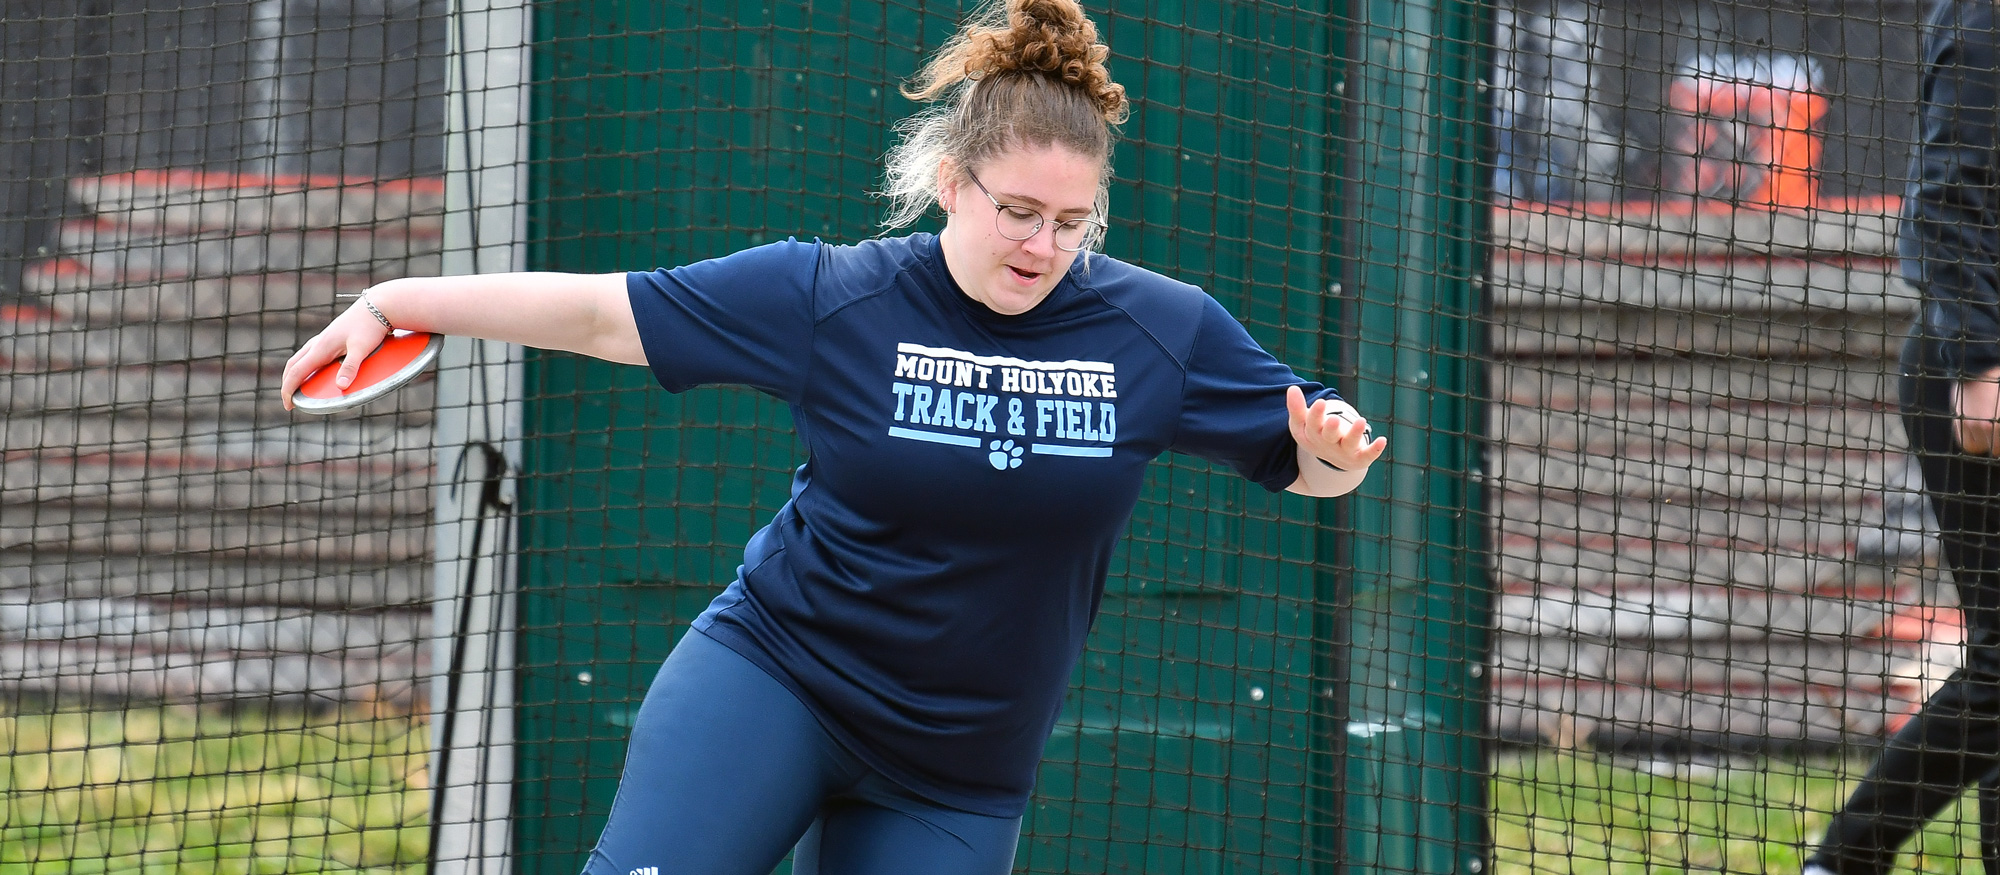 Abby Elliott placed 19th in the discus throw at the Tufts Snowflake Classic on April 1, 2023. (RJB Sports file photo)